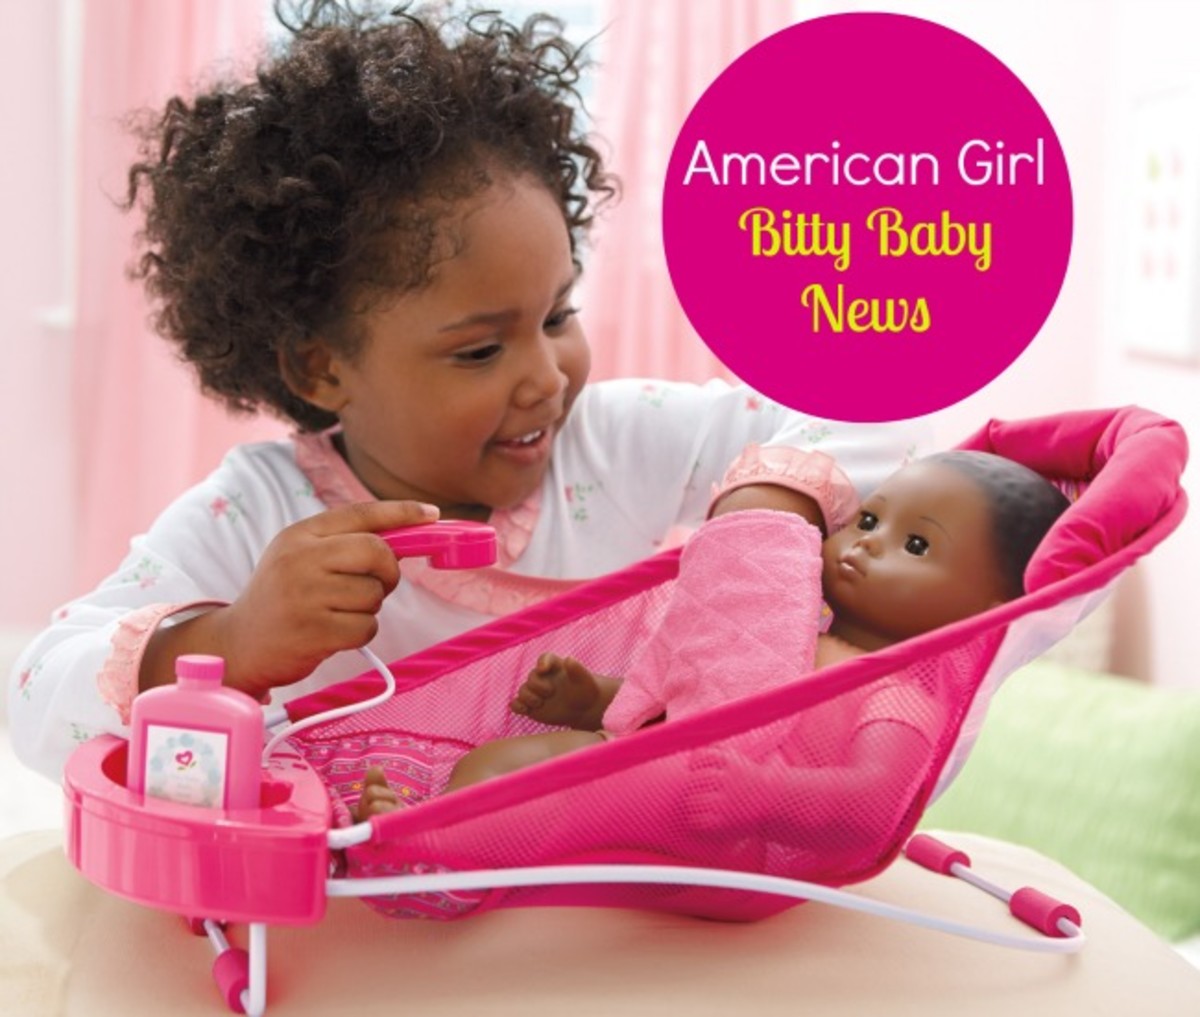 american girl, bitty baby, mom blogger, american girl news, blogger events, great dolls for girls, look alike dolls